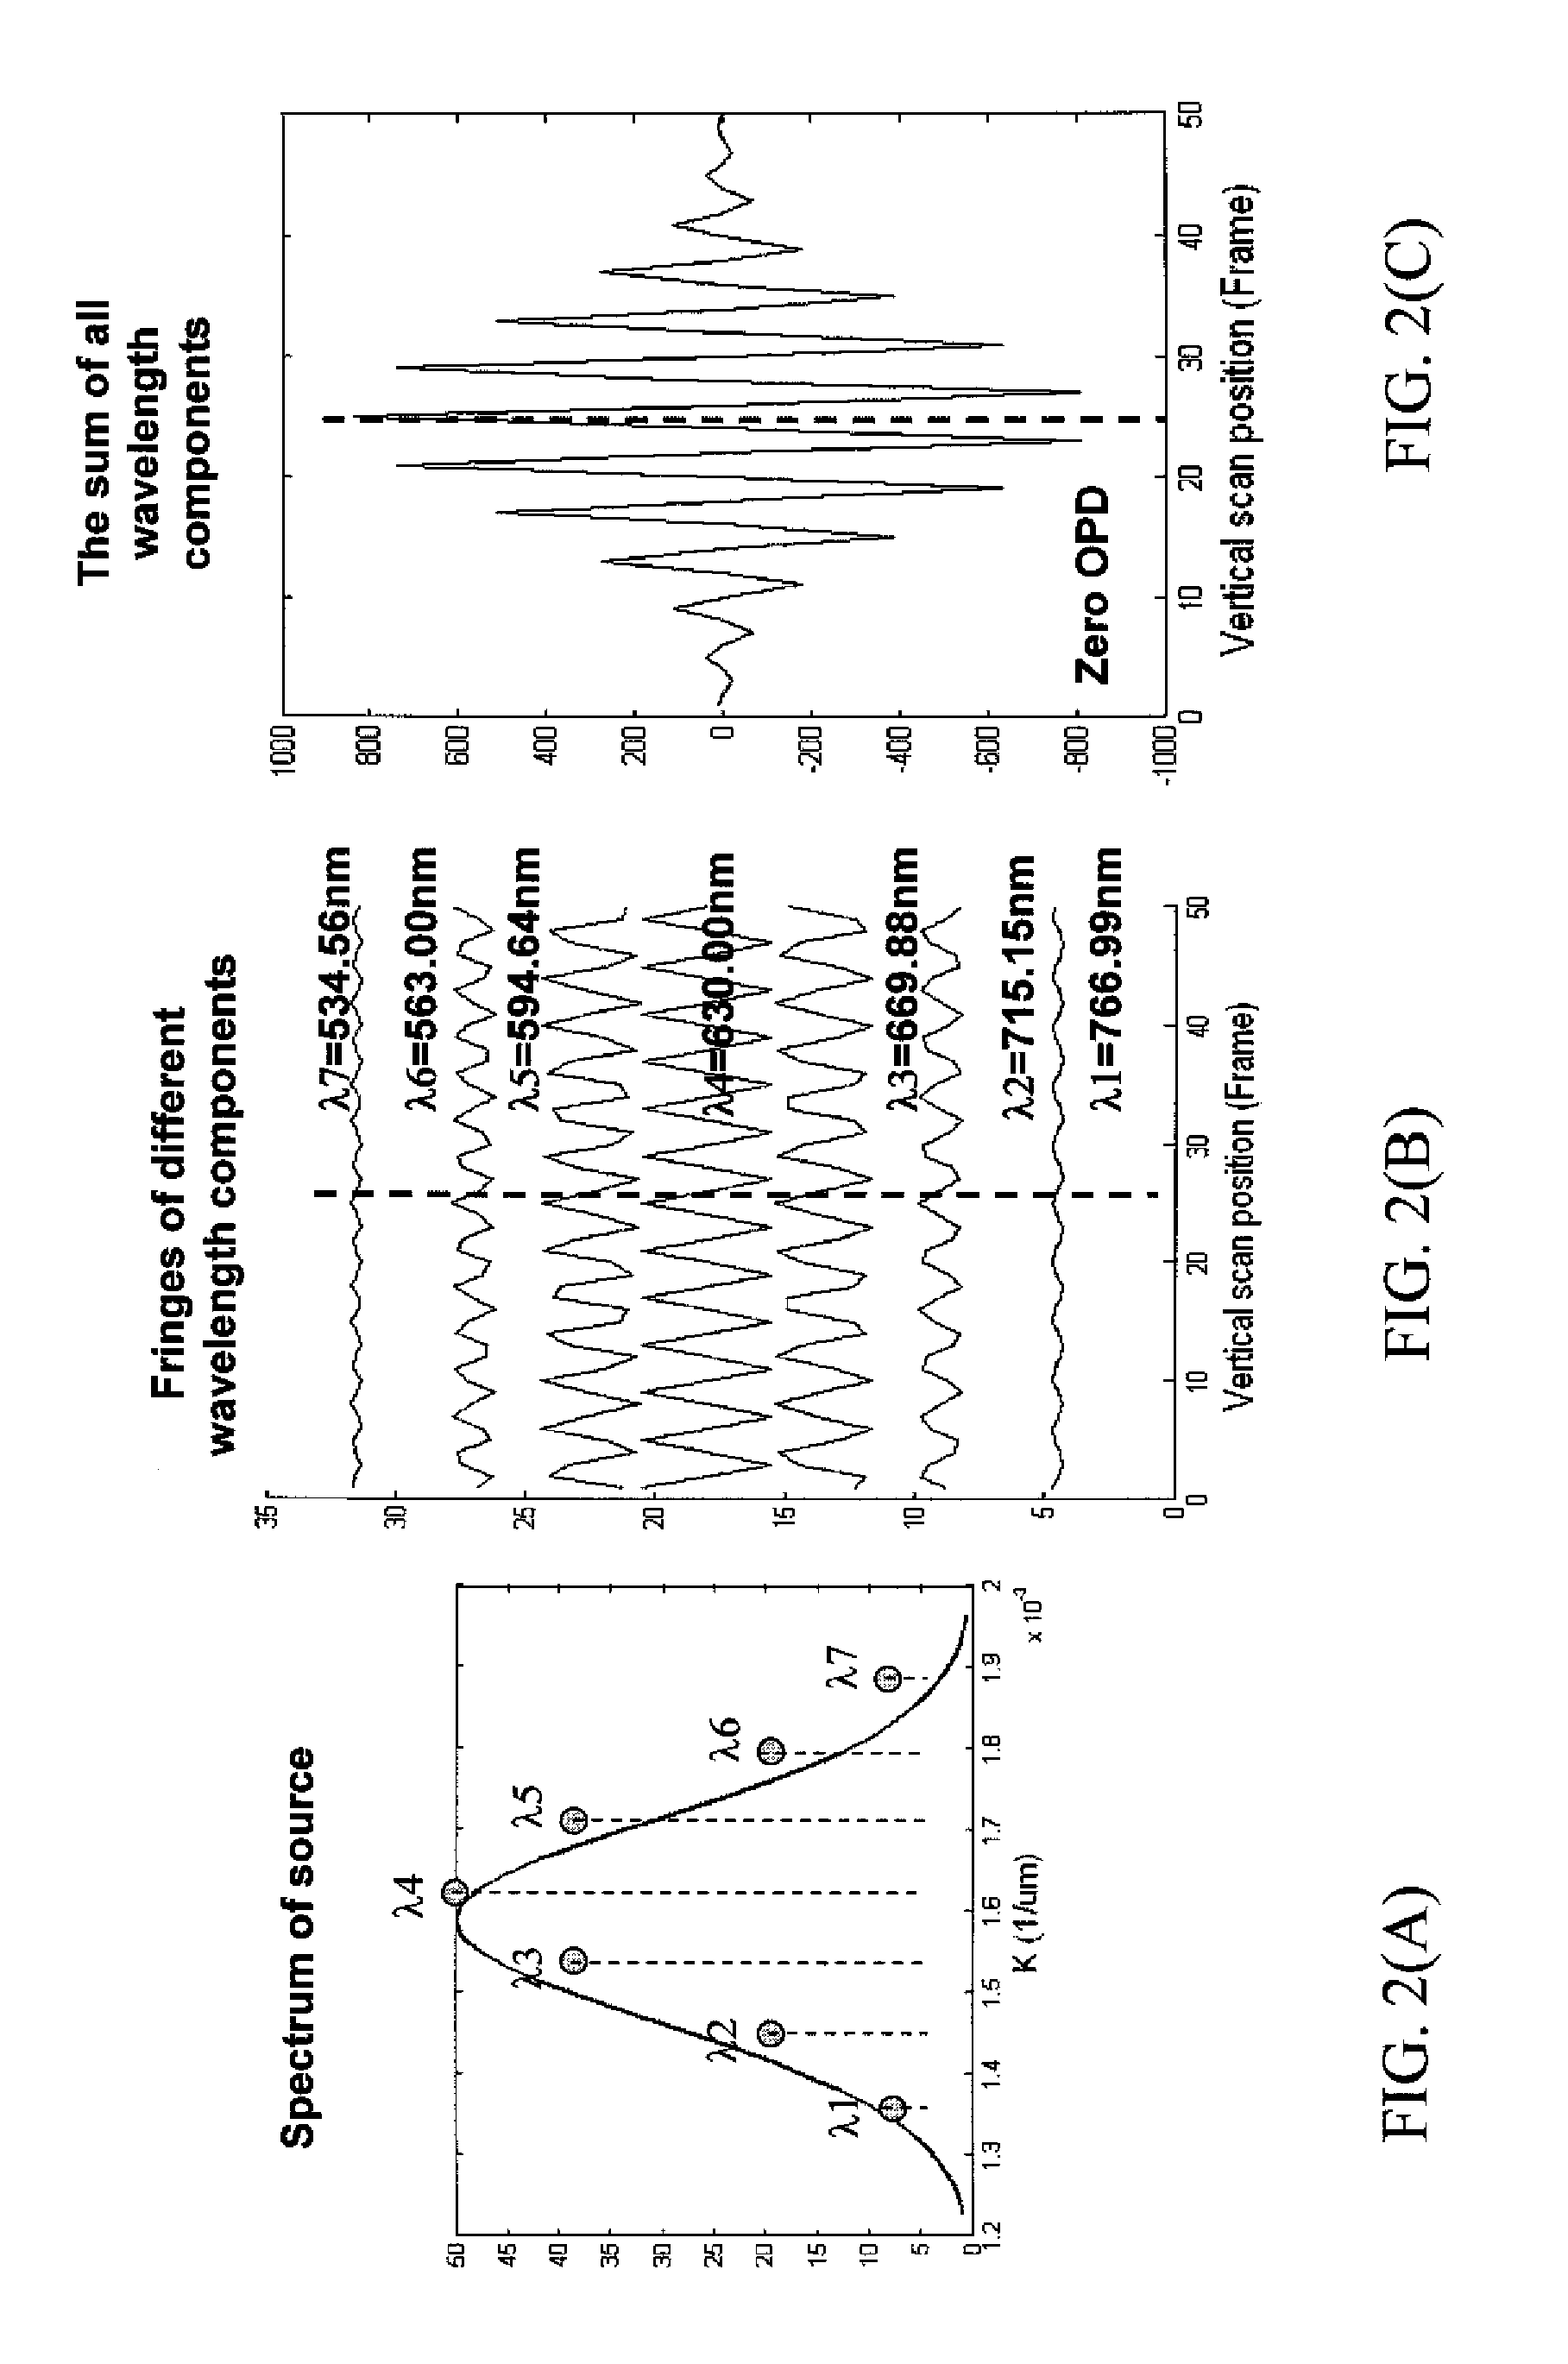 In-phase/in-quadrature demodulator for spectral information of interference signal